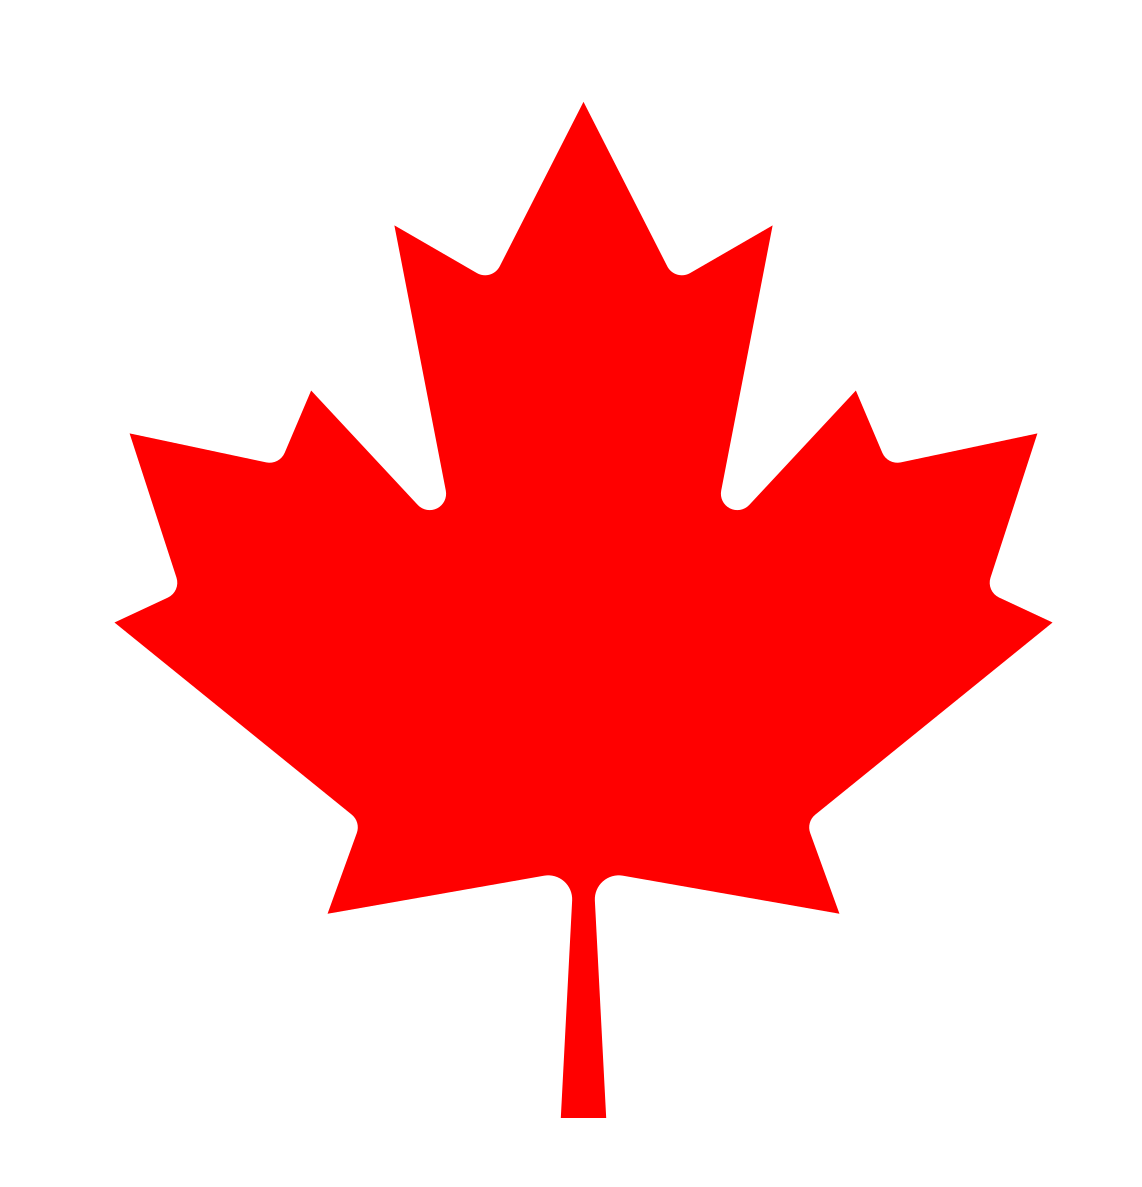 Flag of Canada Image flagpng.com